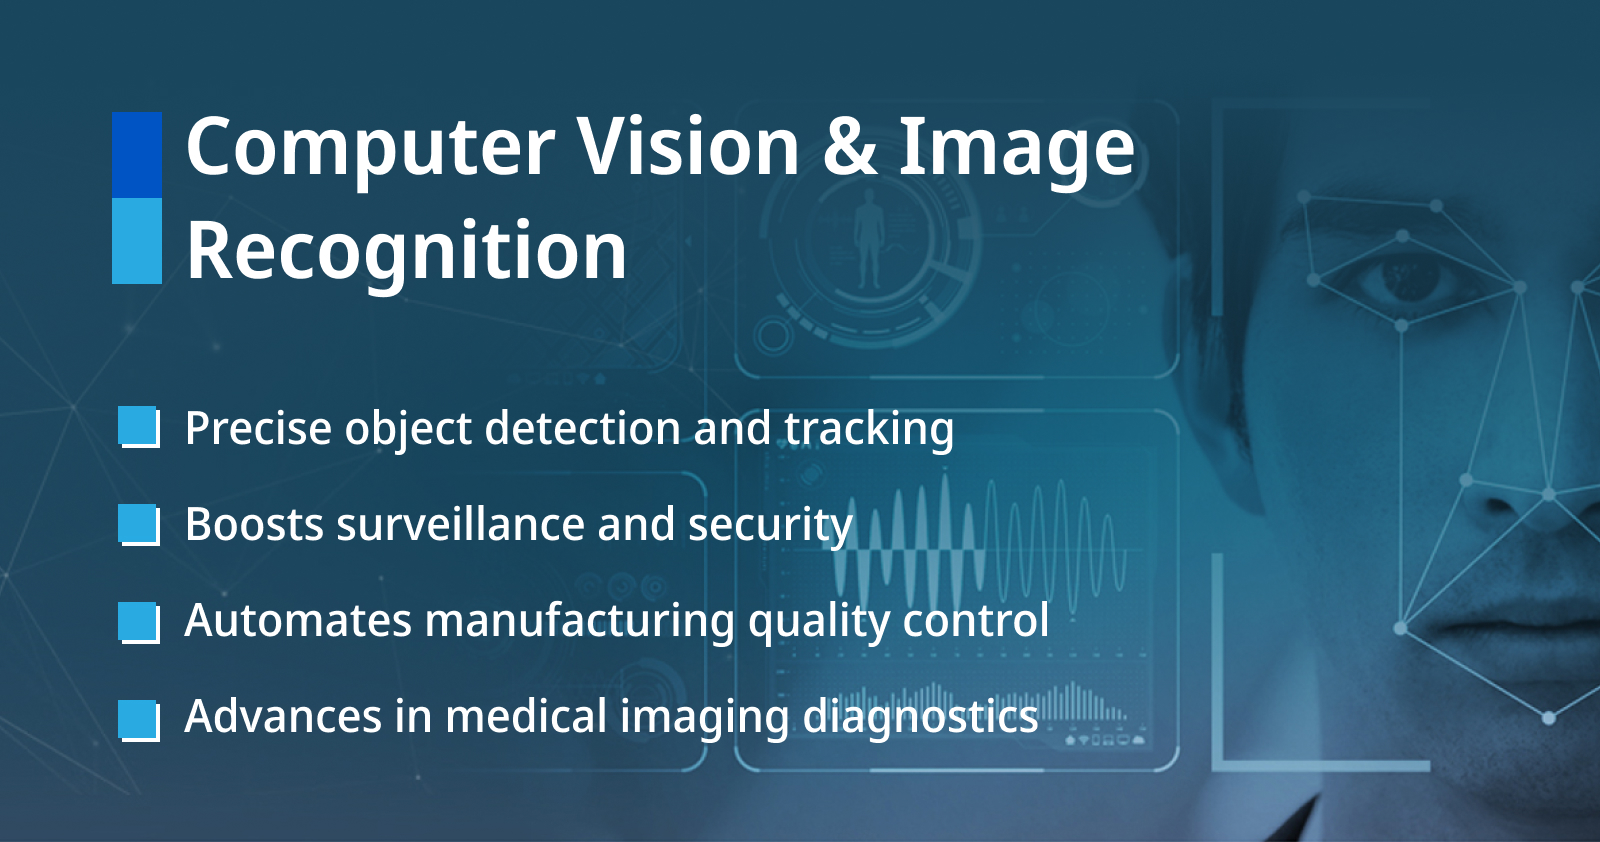 Computer Vision & Image Recognition